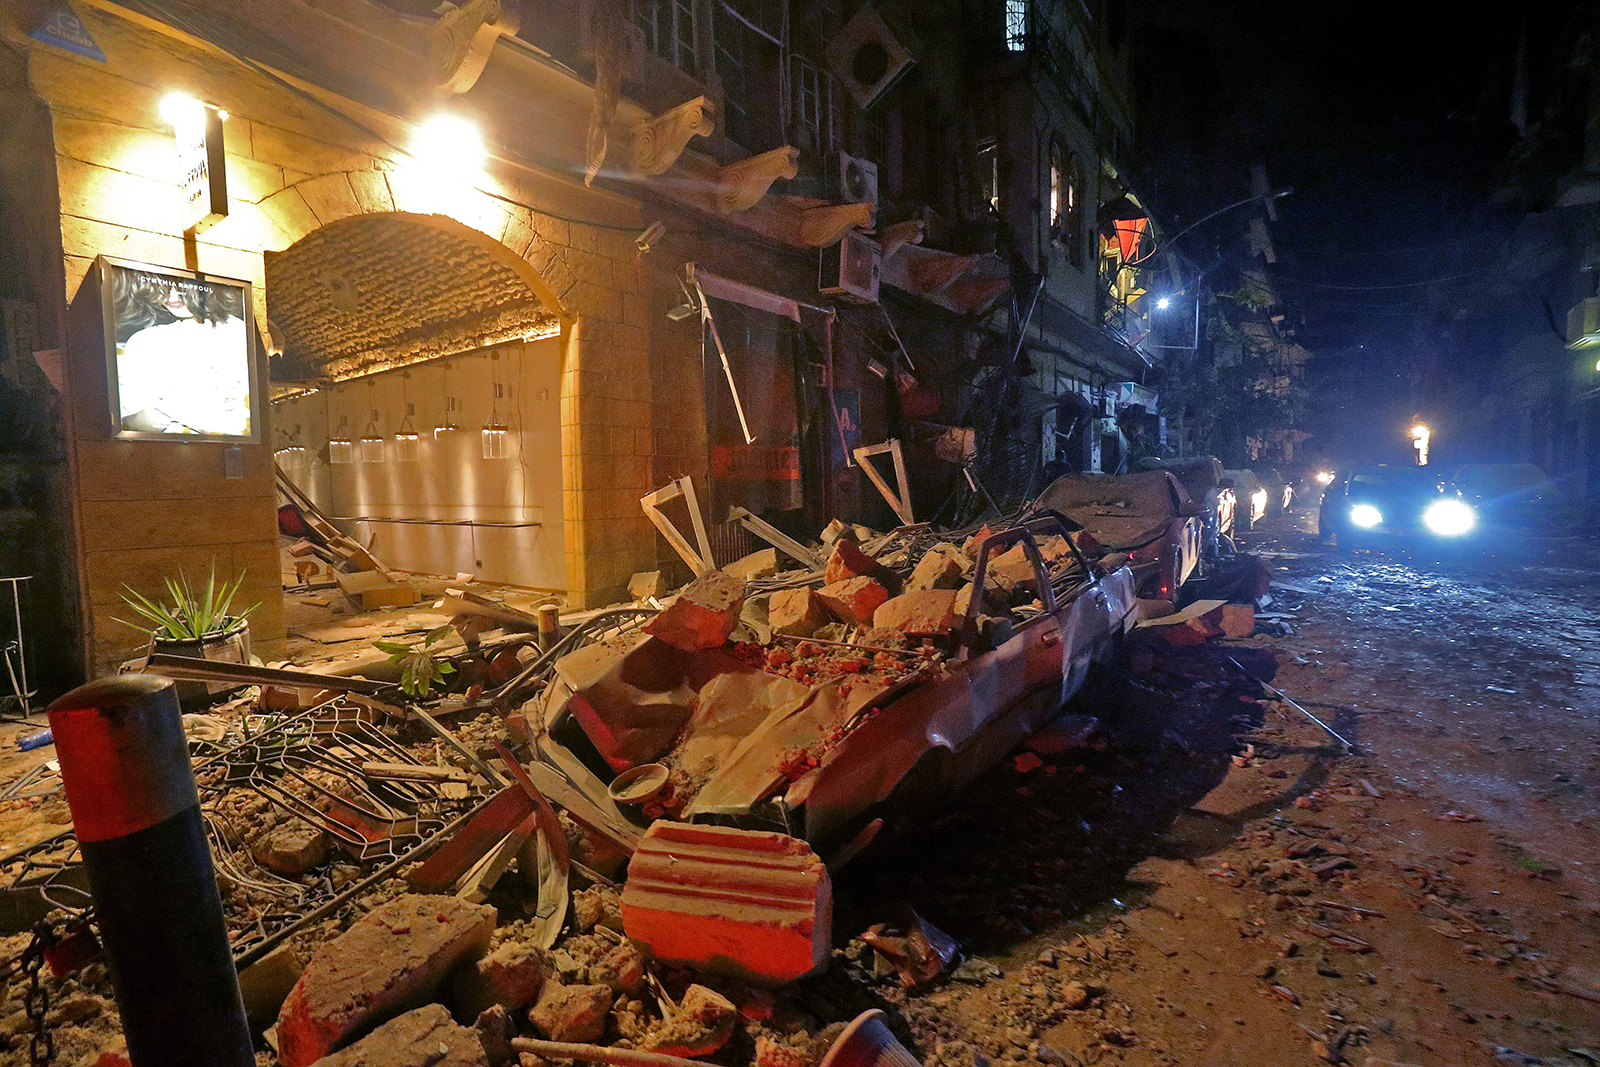 Deadly explosion in Beirut shocks the world, Trump said it “looks like a terrible attack”